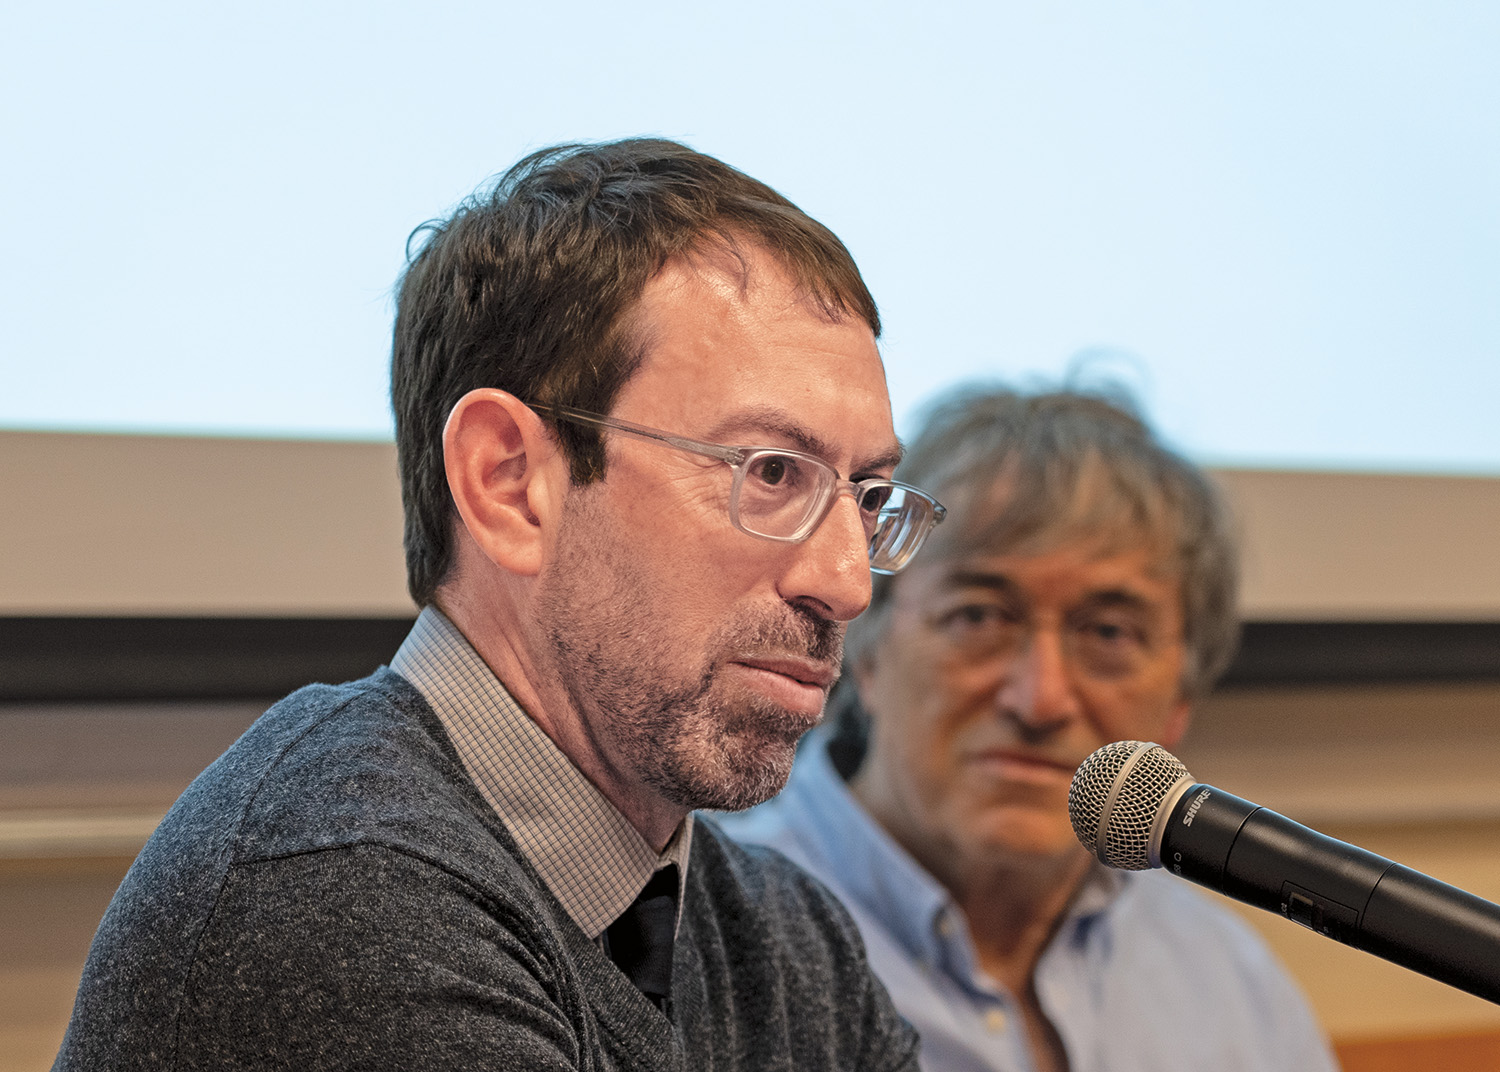 Samuel Moyn sits in front of a microphone. He wears a sweater, collared shirt, and glasses. Moeshe Halbertal sits in the background and watches him talk.